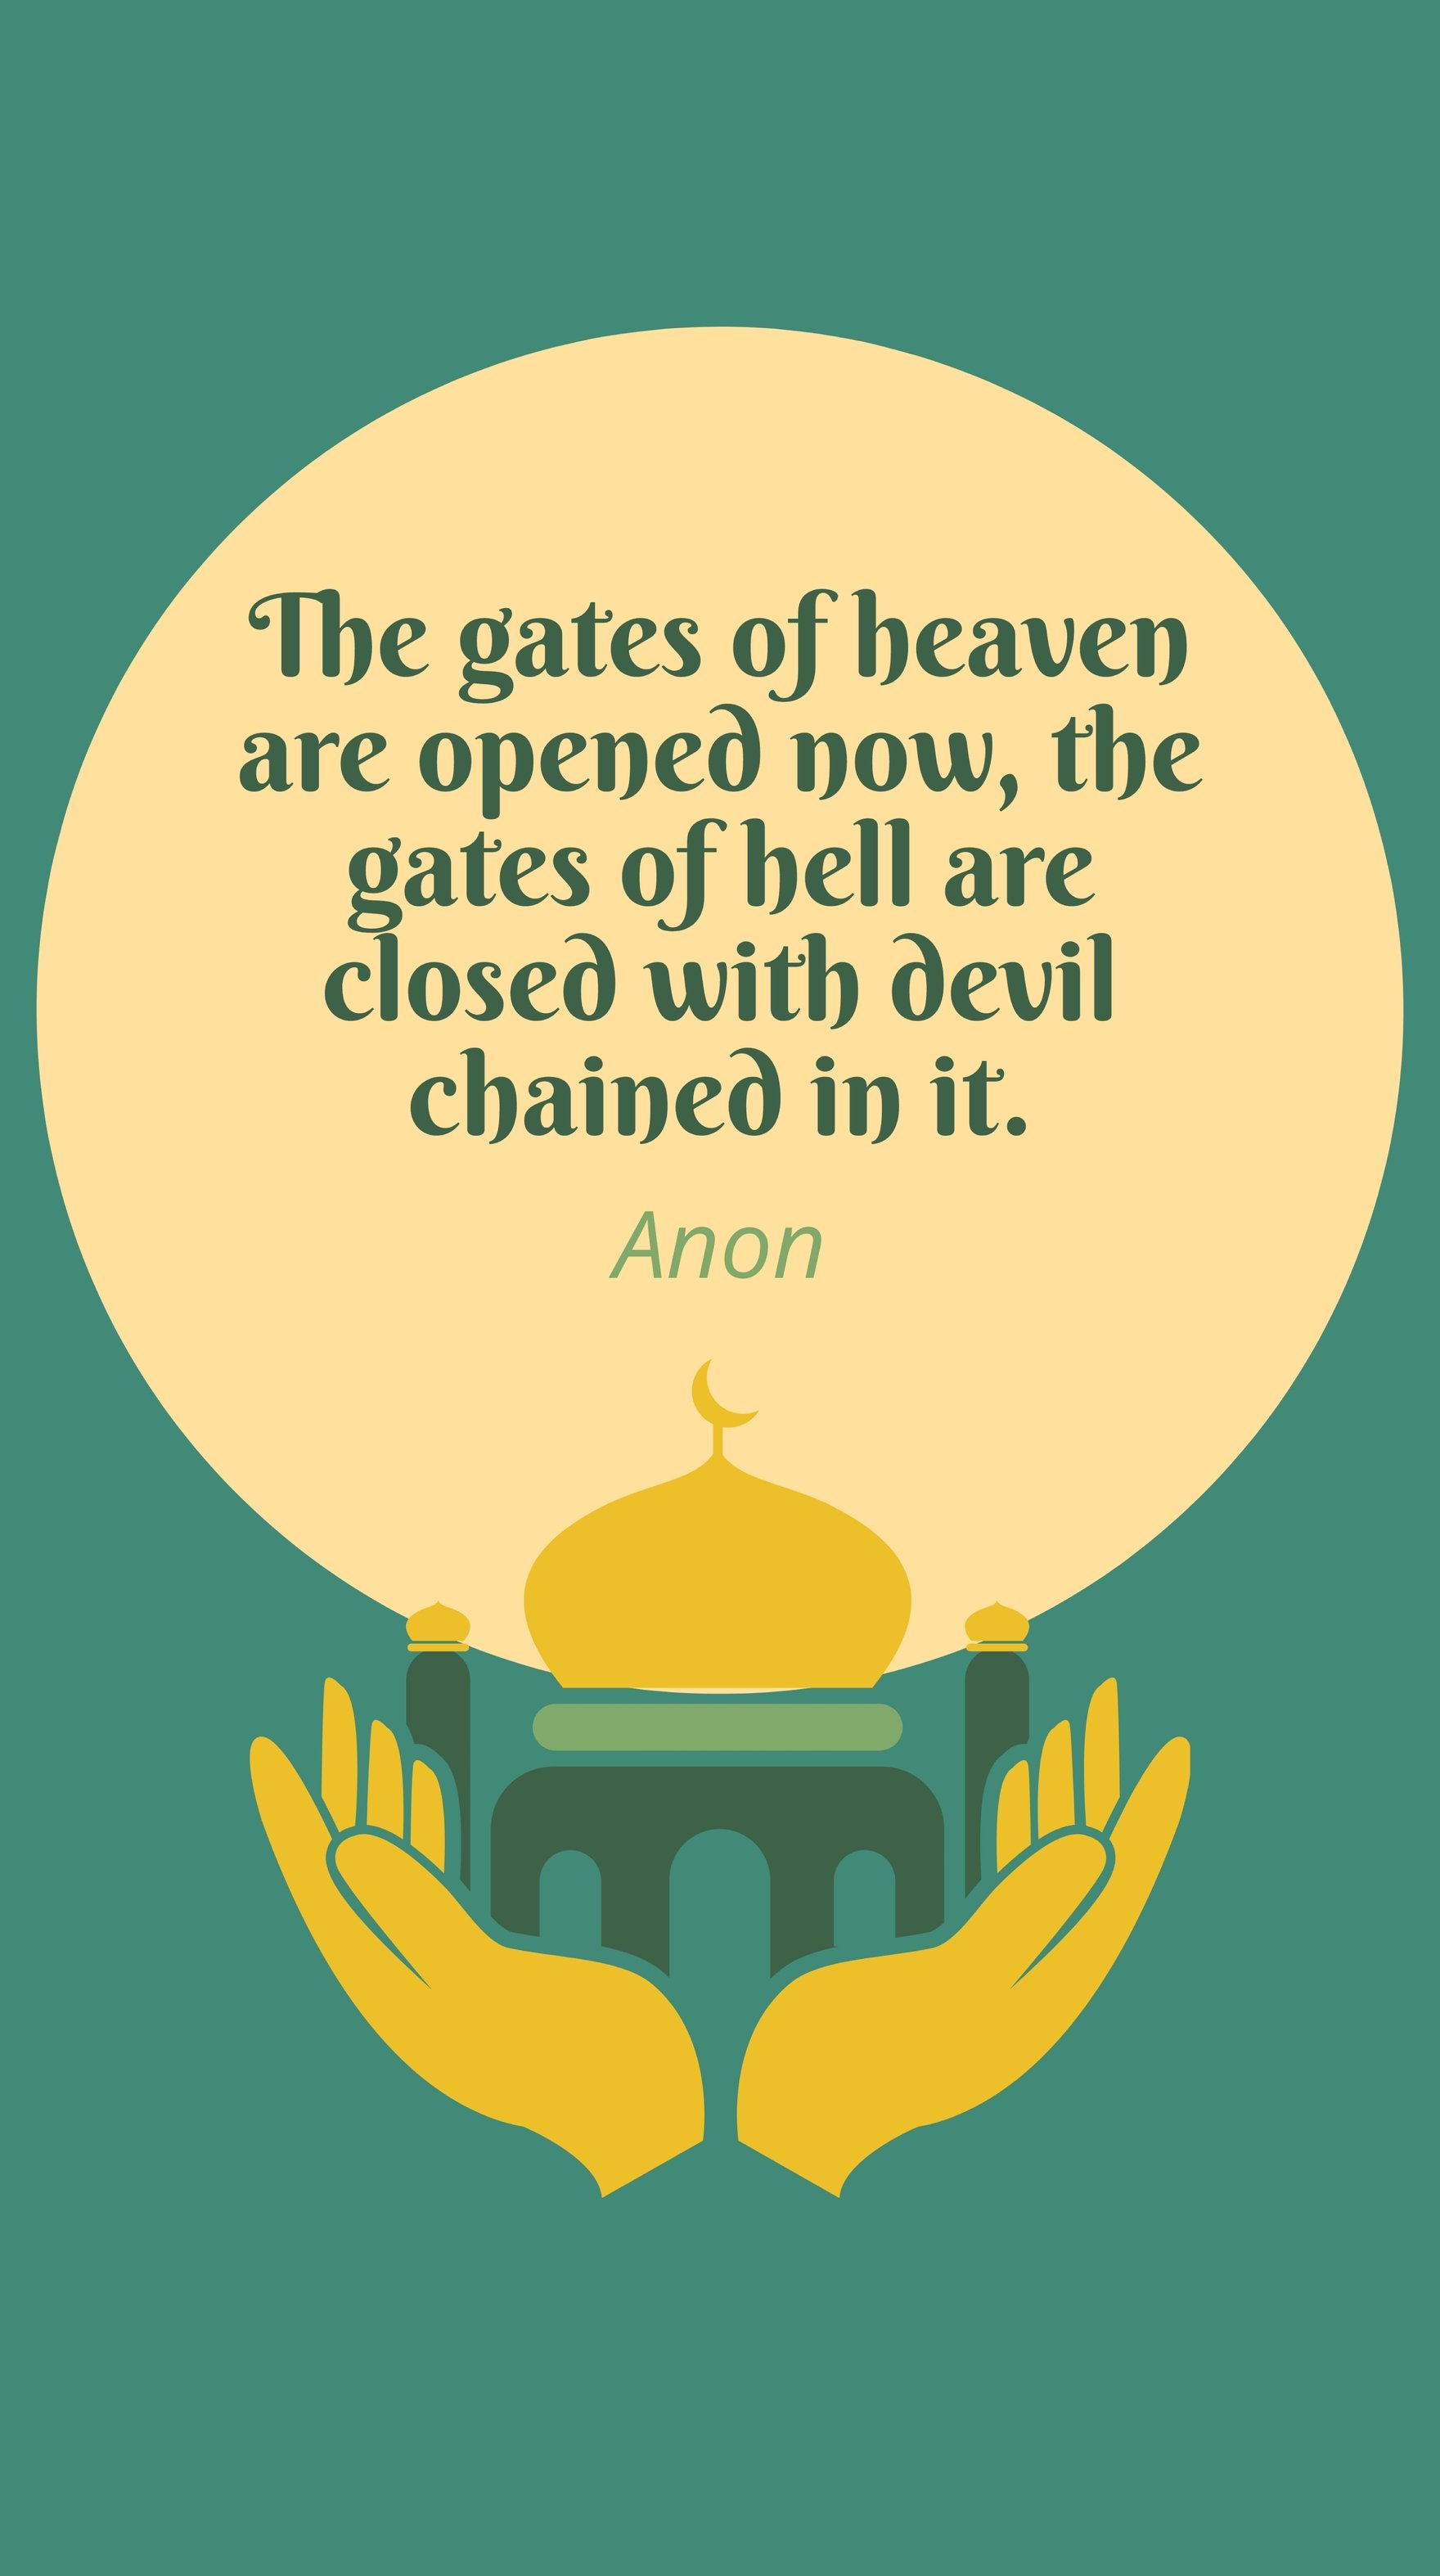 Free Anon - The gates of heaven are opened now, the gates of hell are closed with devil chained in it. in JPG